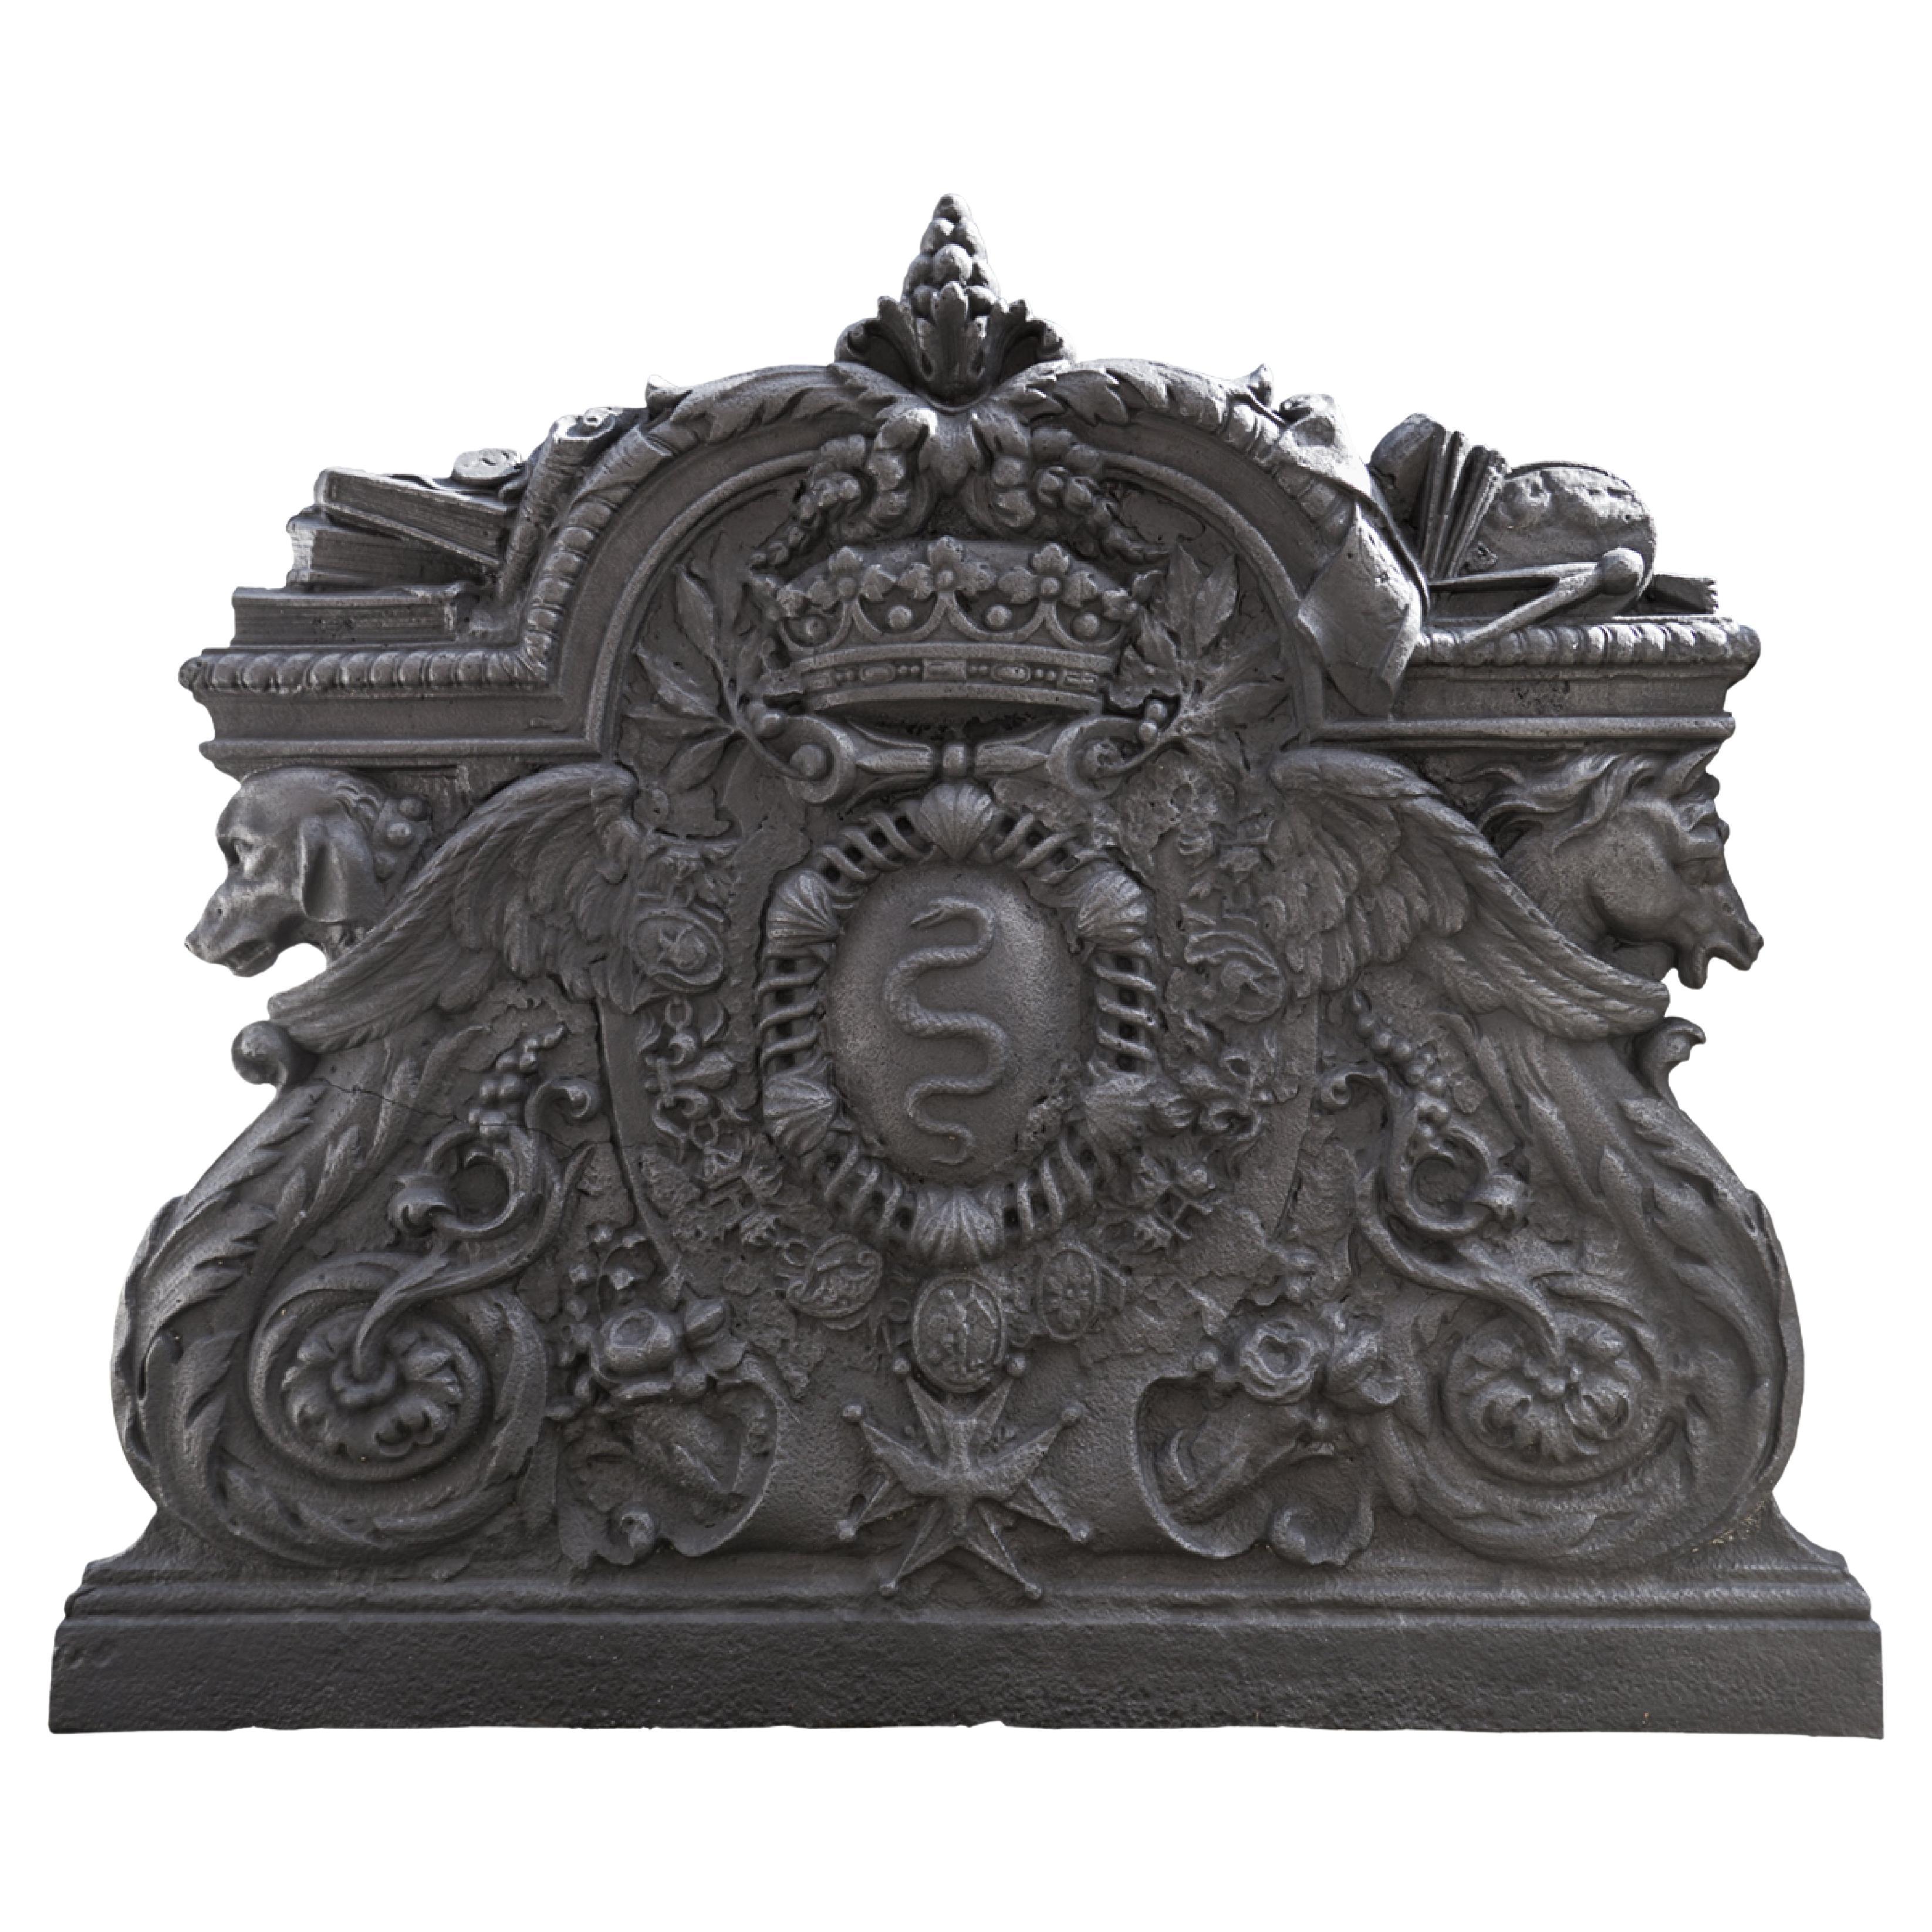 Cast iron fireback with the coat of arms of Colbert, marquis de Seignelay